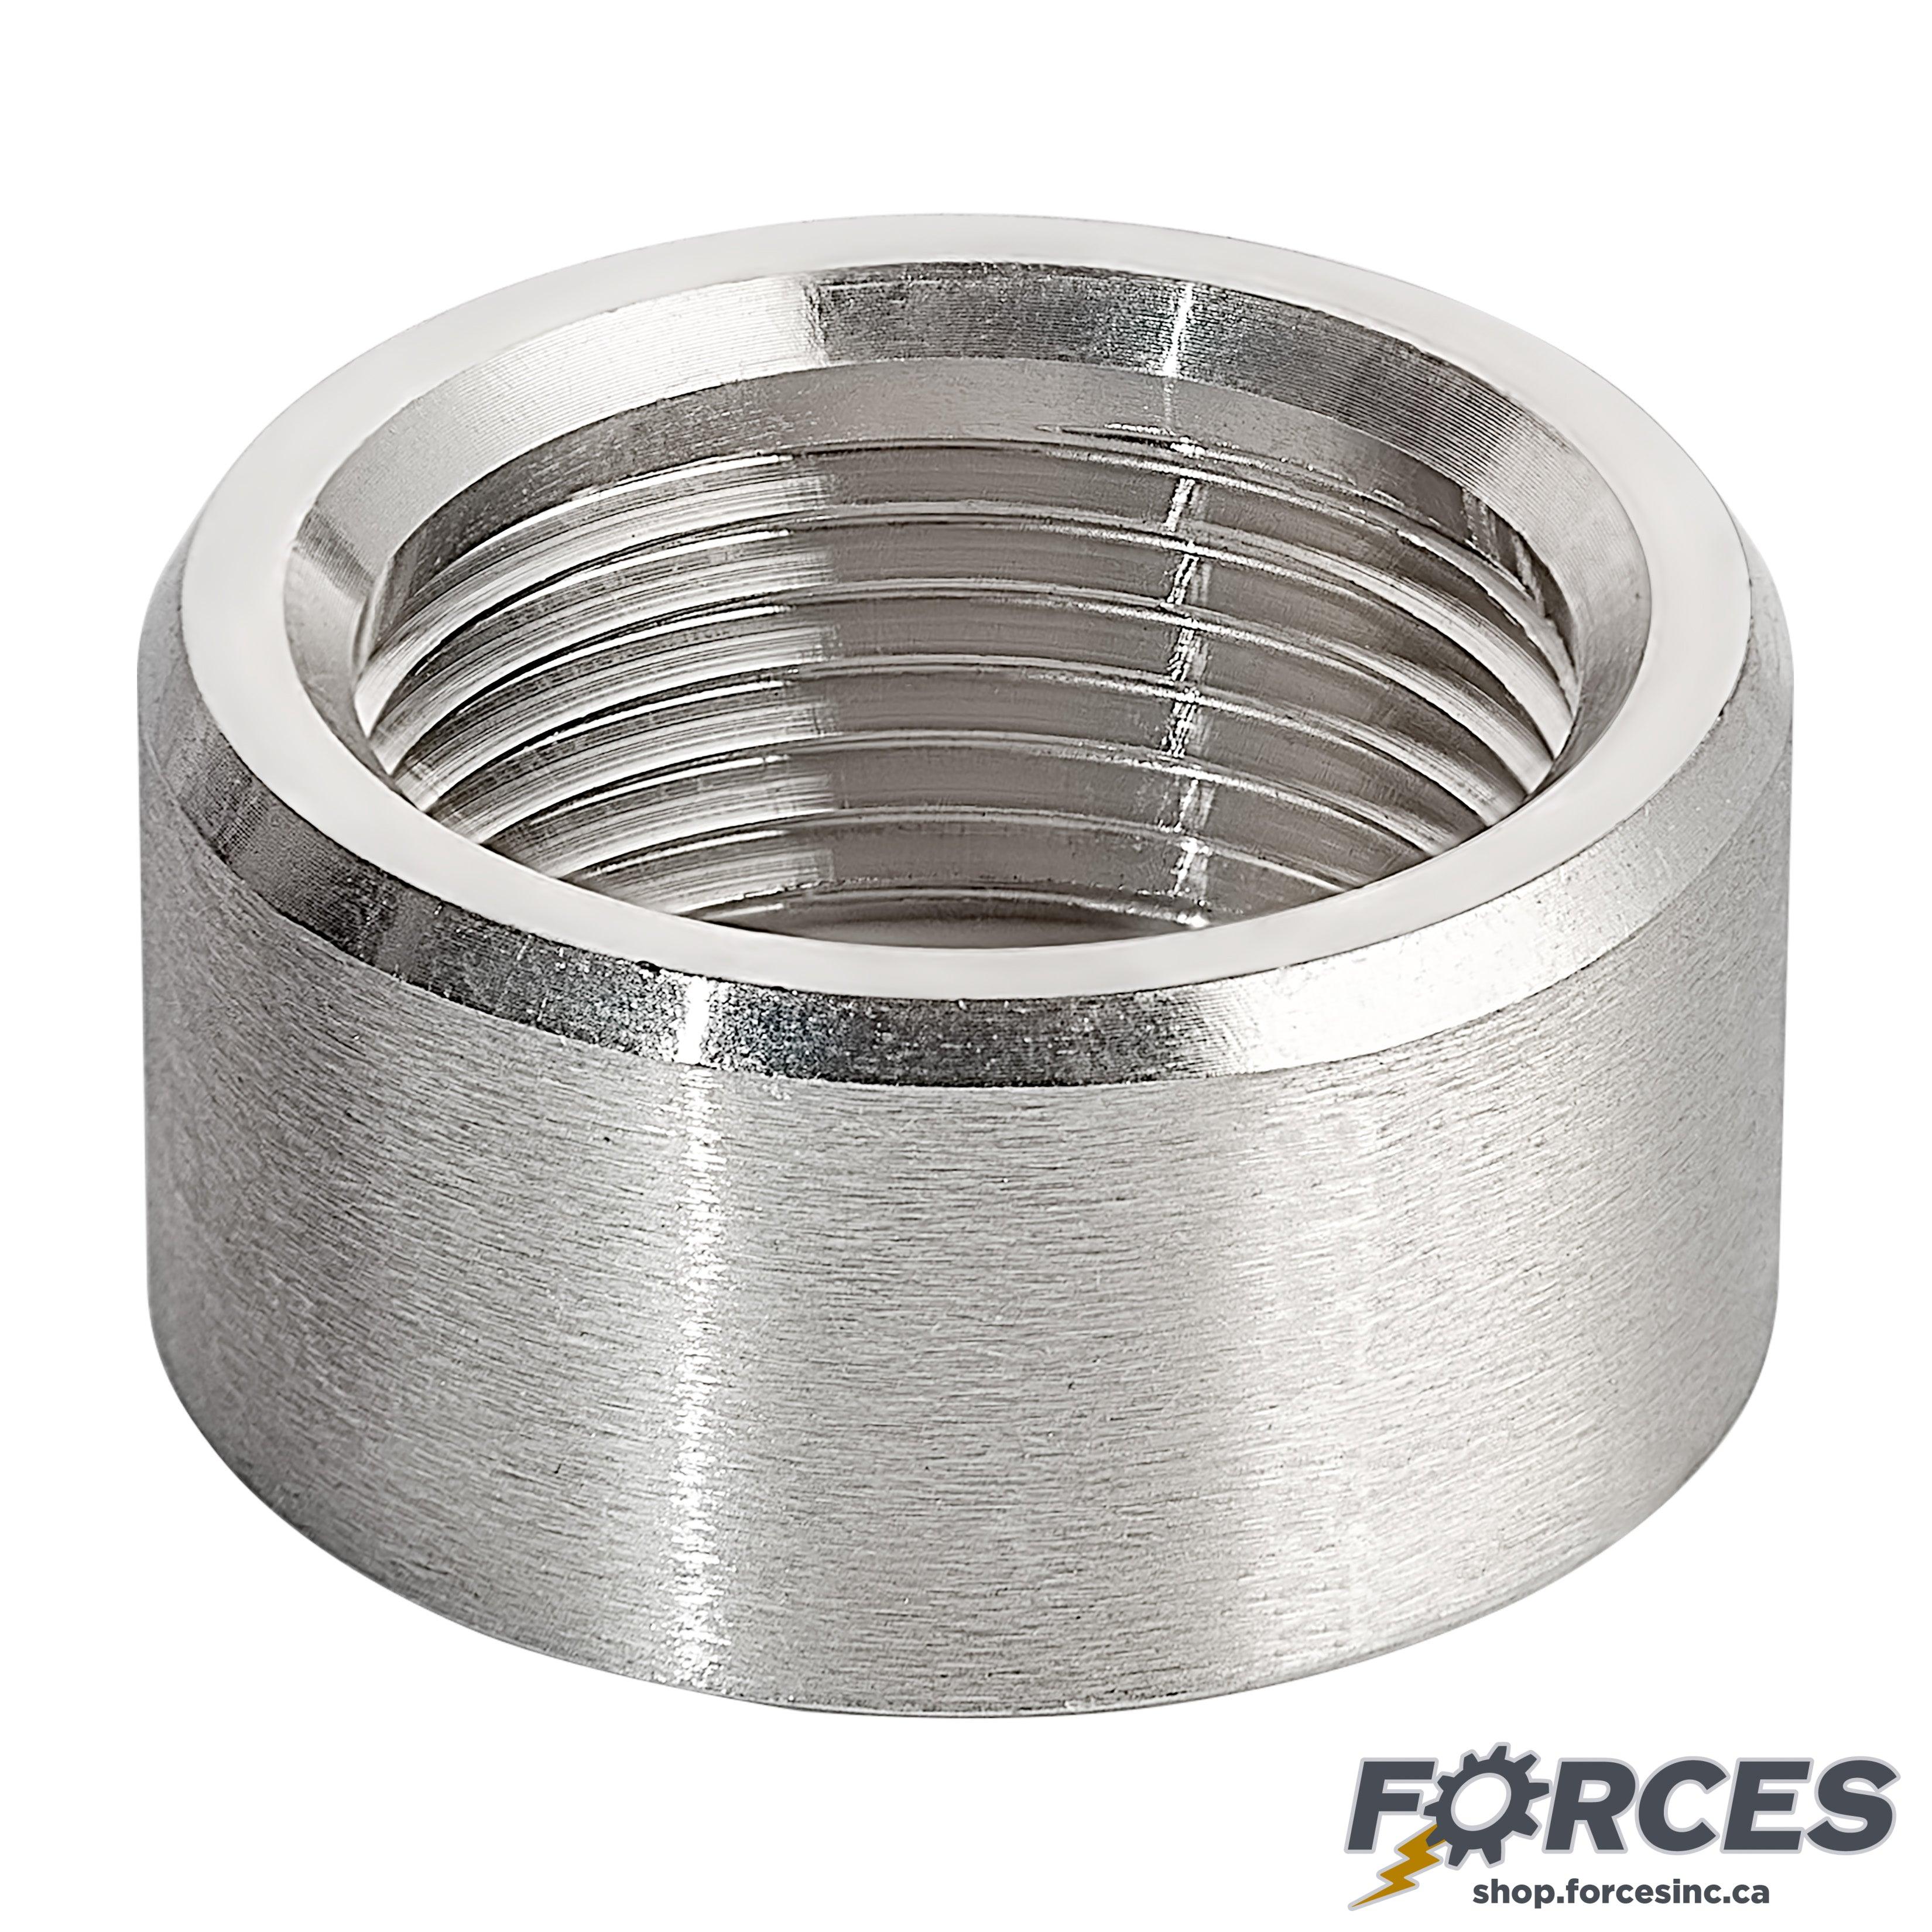 1/4" Half-Coupling NPT #150 - Stainless Steel 316 - Forces Inc